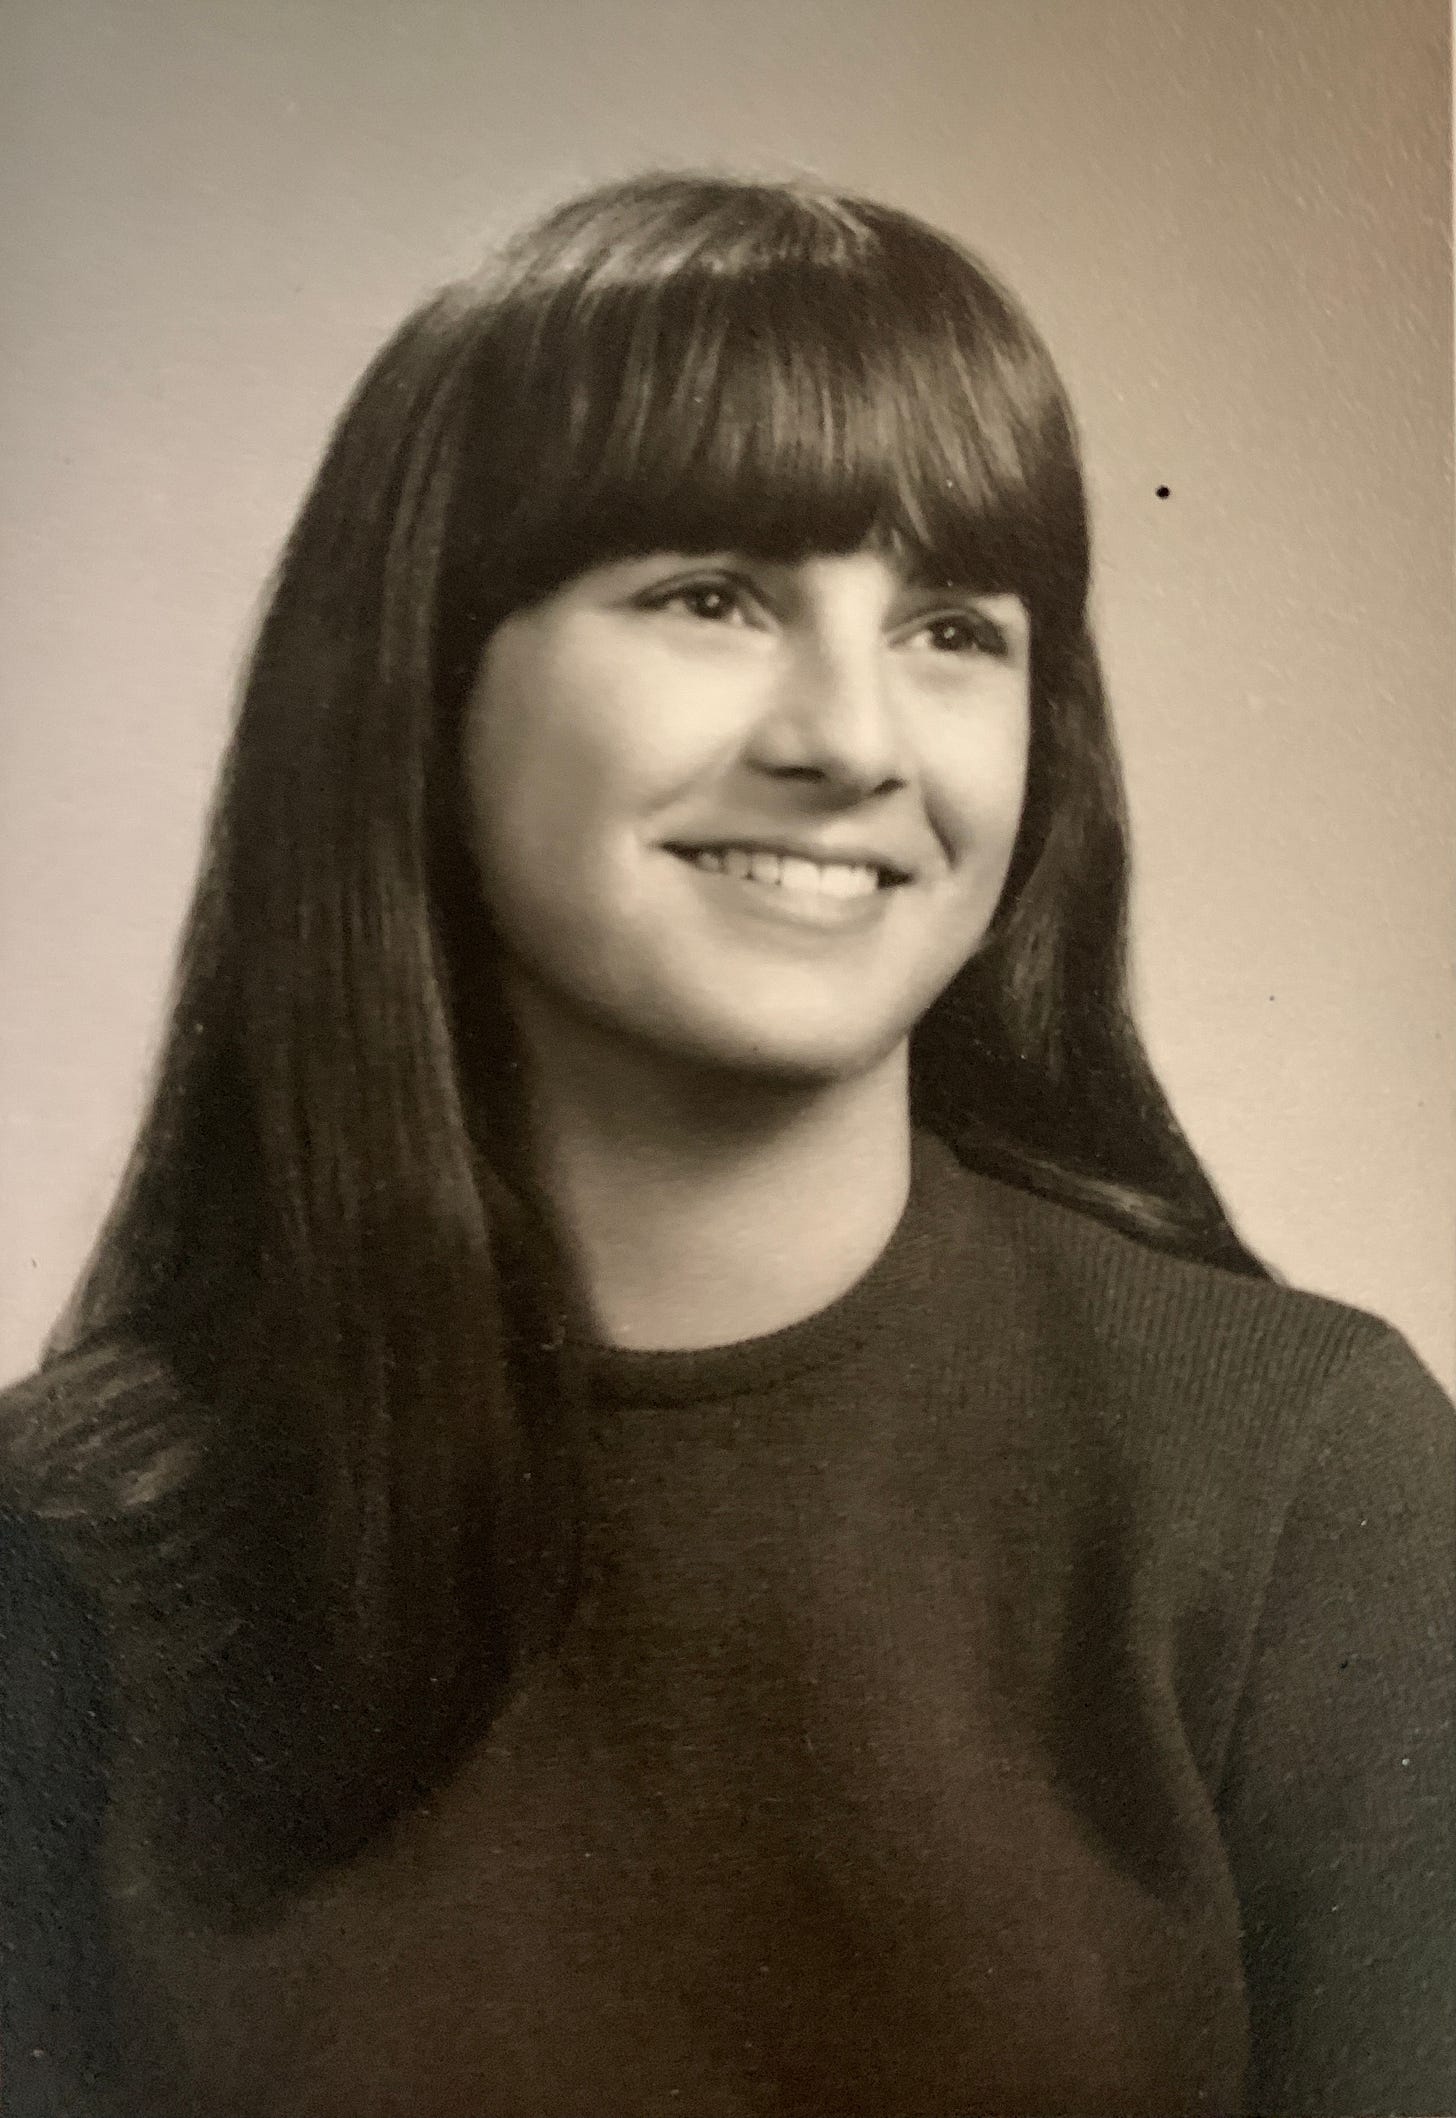 High school graduation photo of a girl with long dark hair and a nice smile